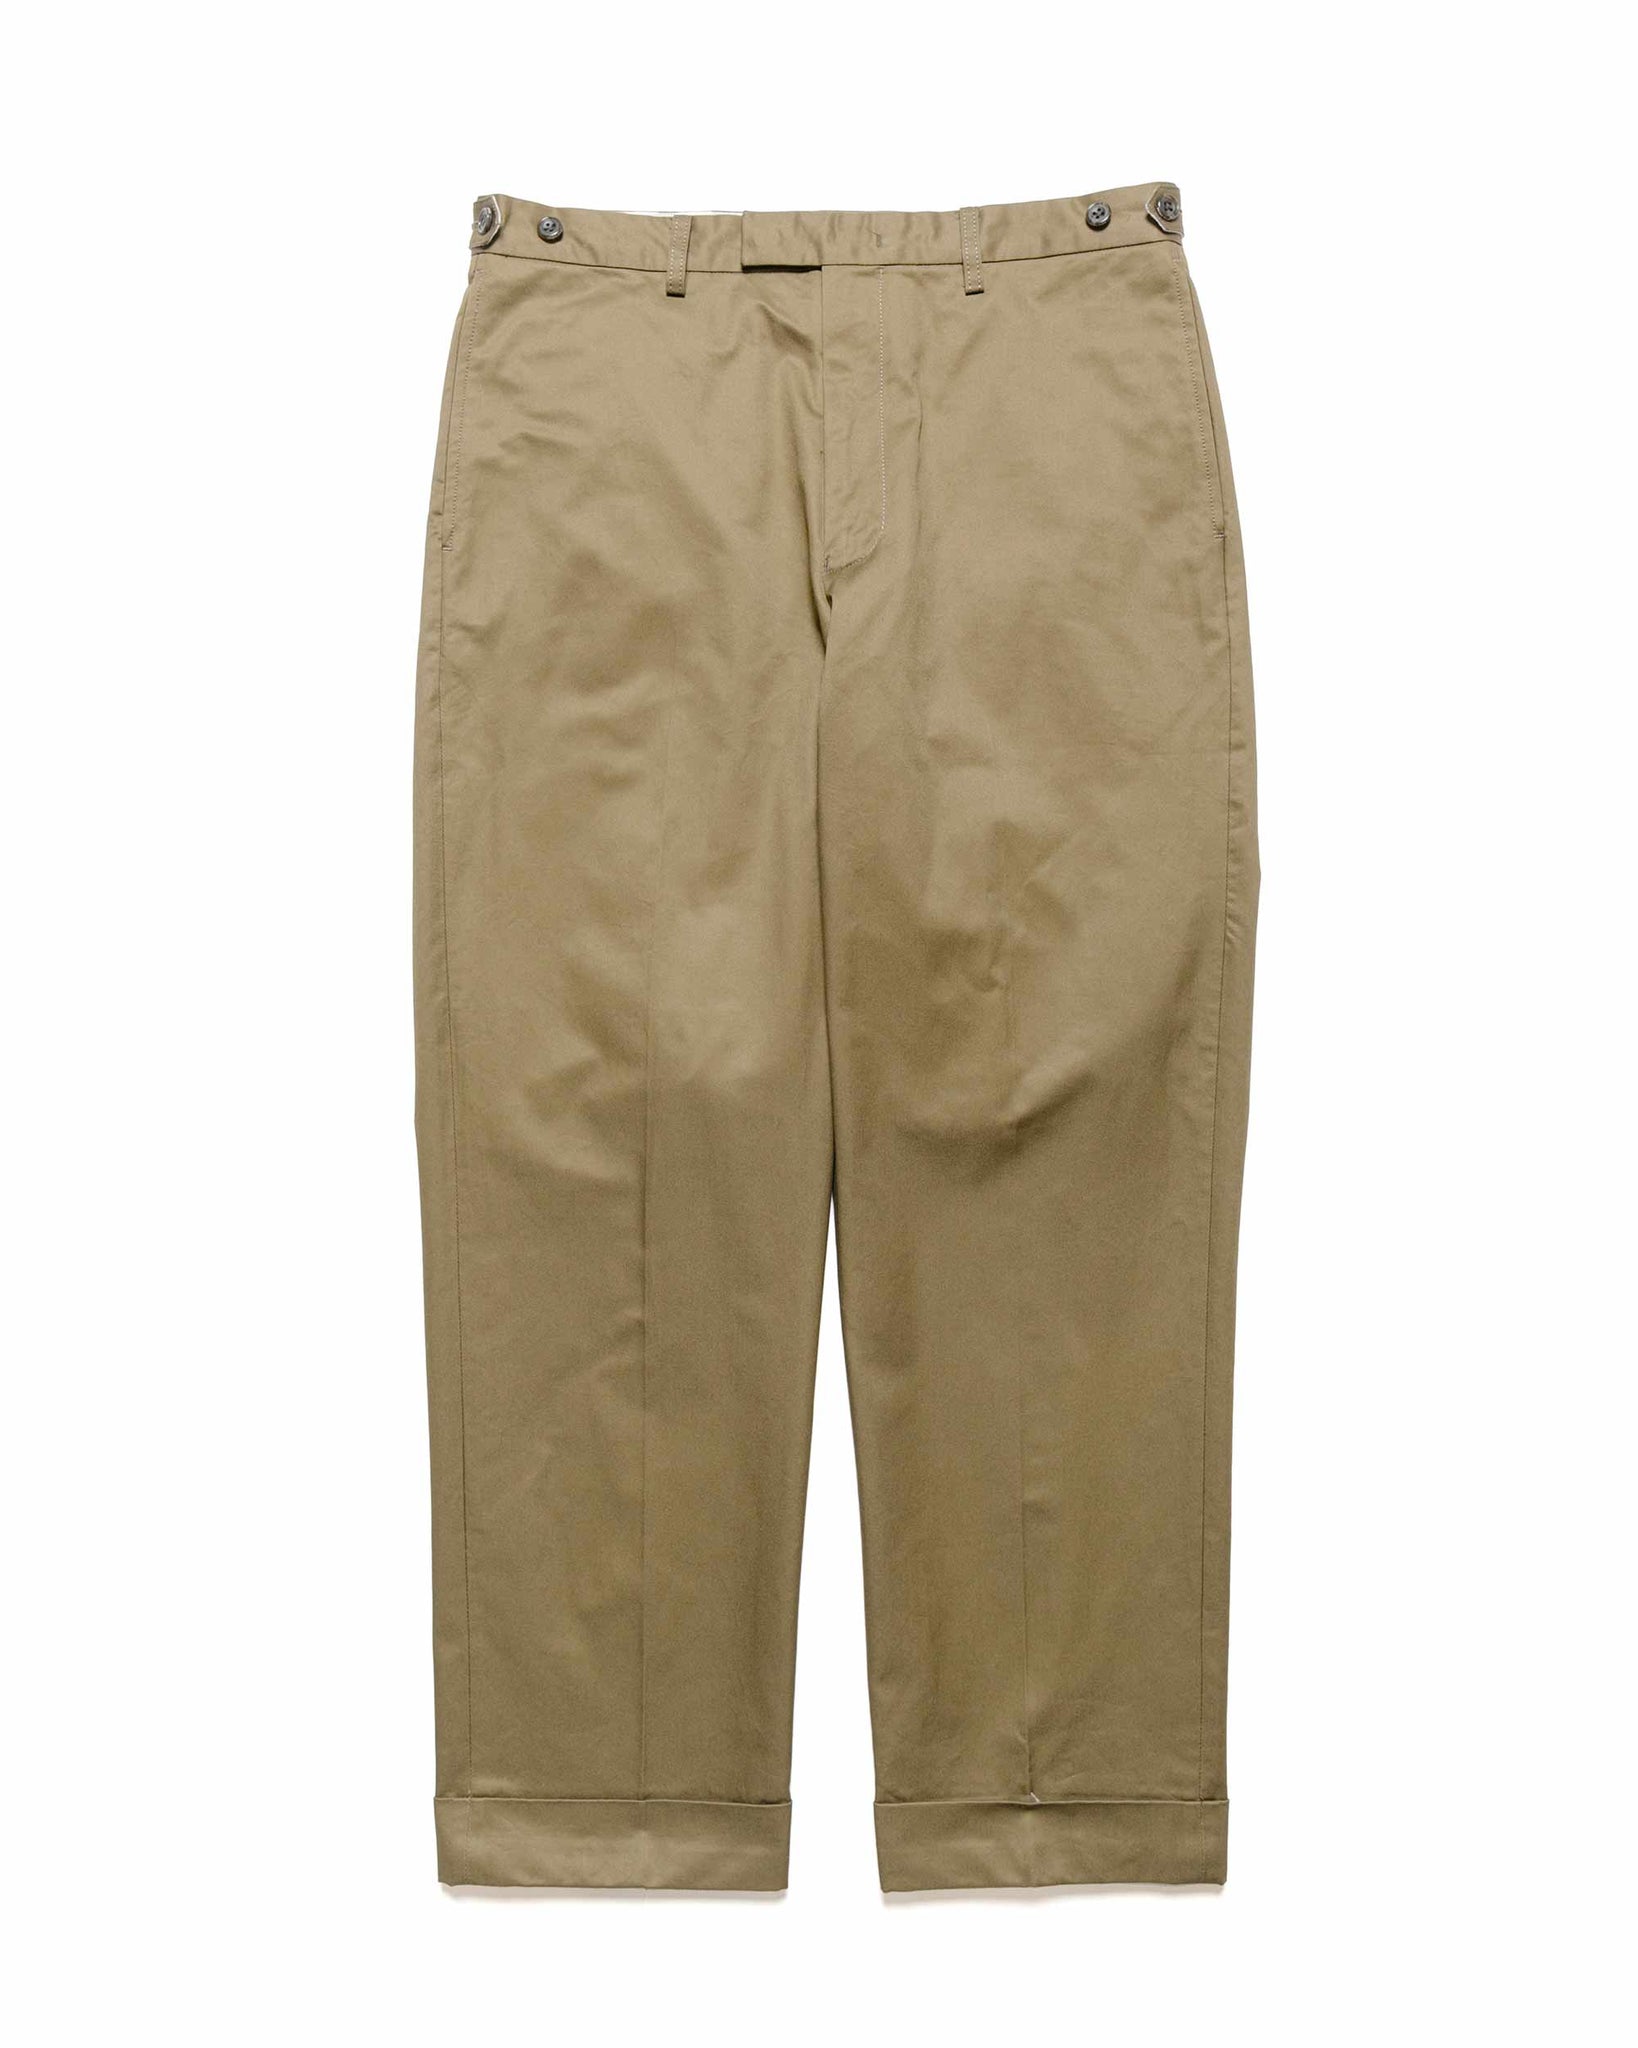 Beams Plus IVY Trousers Ankle-Cut 803 Twill Olive